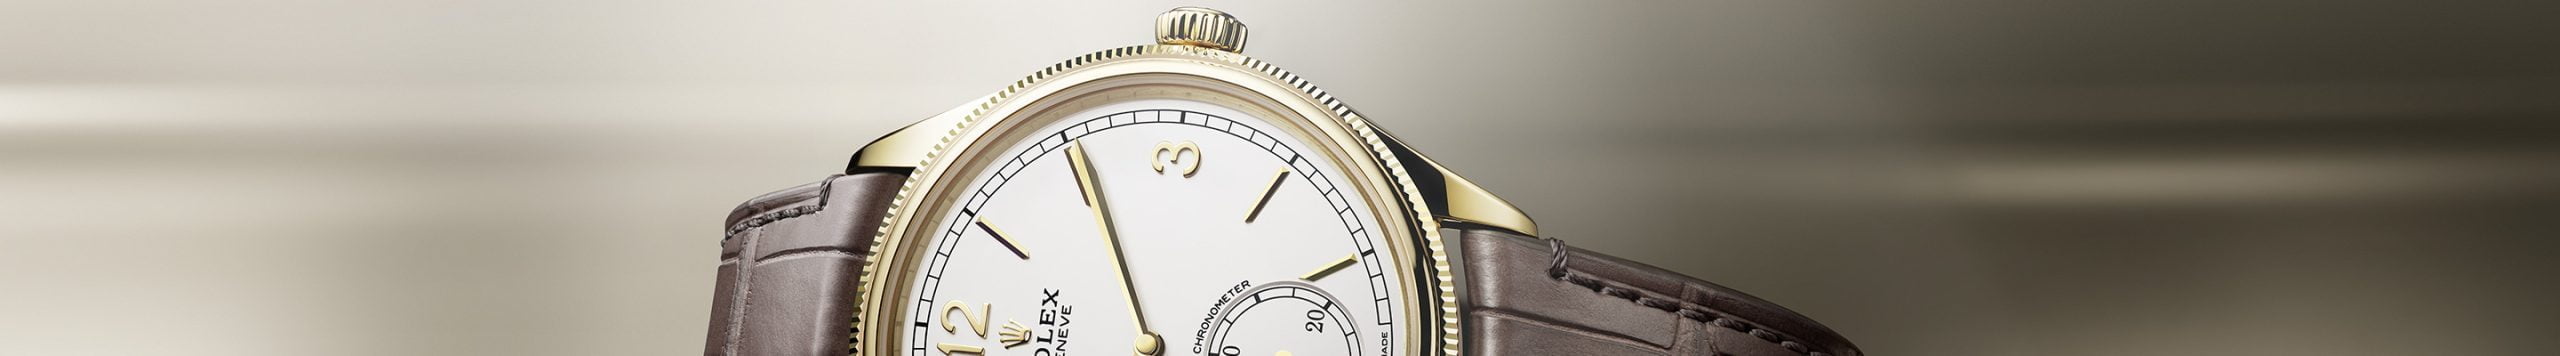 Rolex 1908 collection page banner